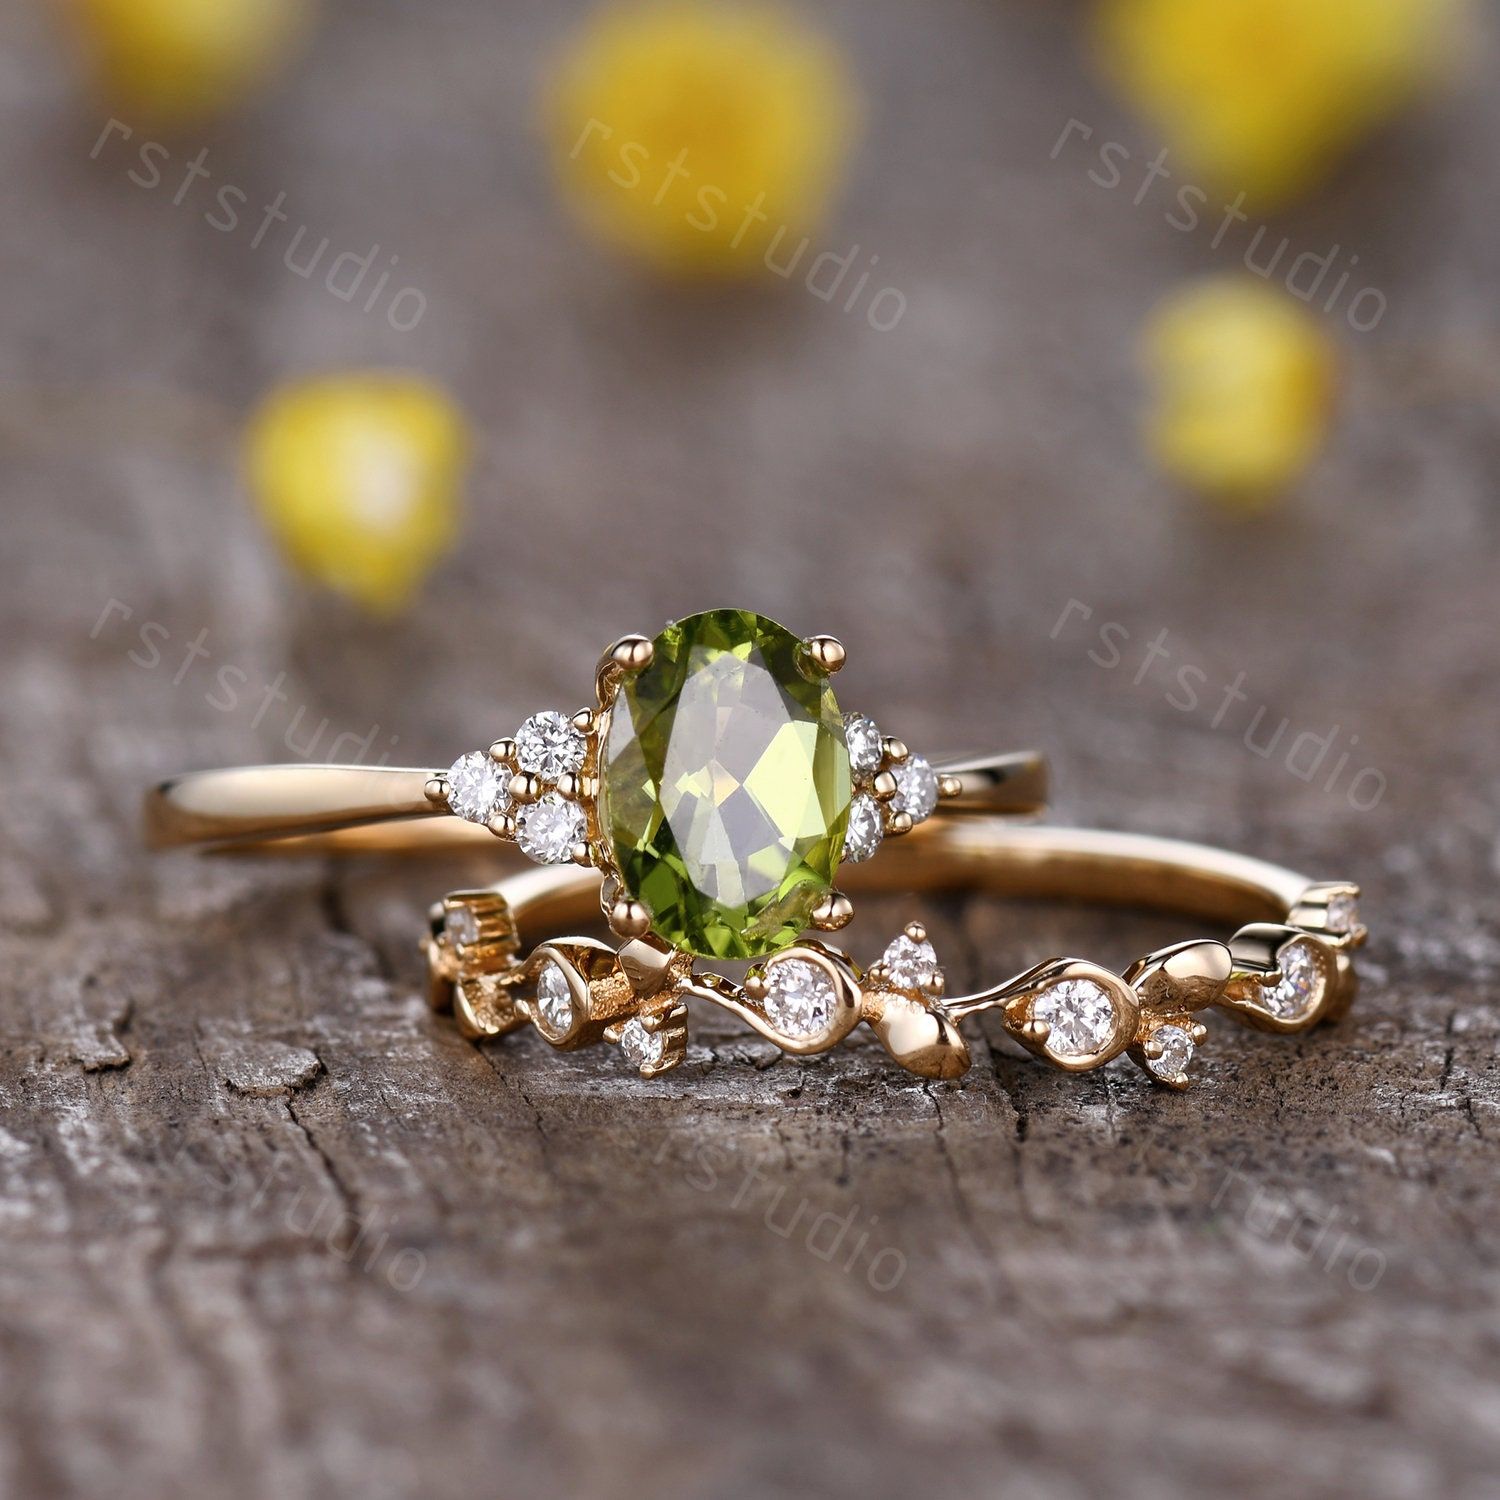 Present an antique gift to your loved one’s by Birthstone rings